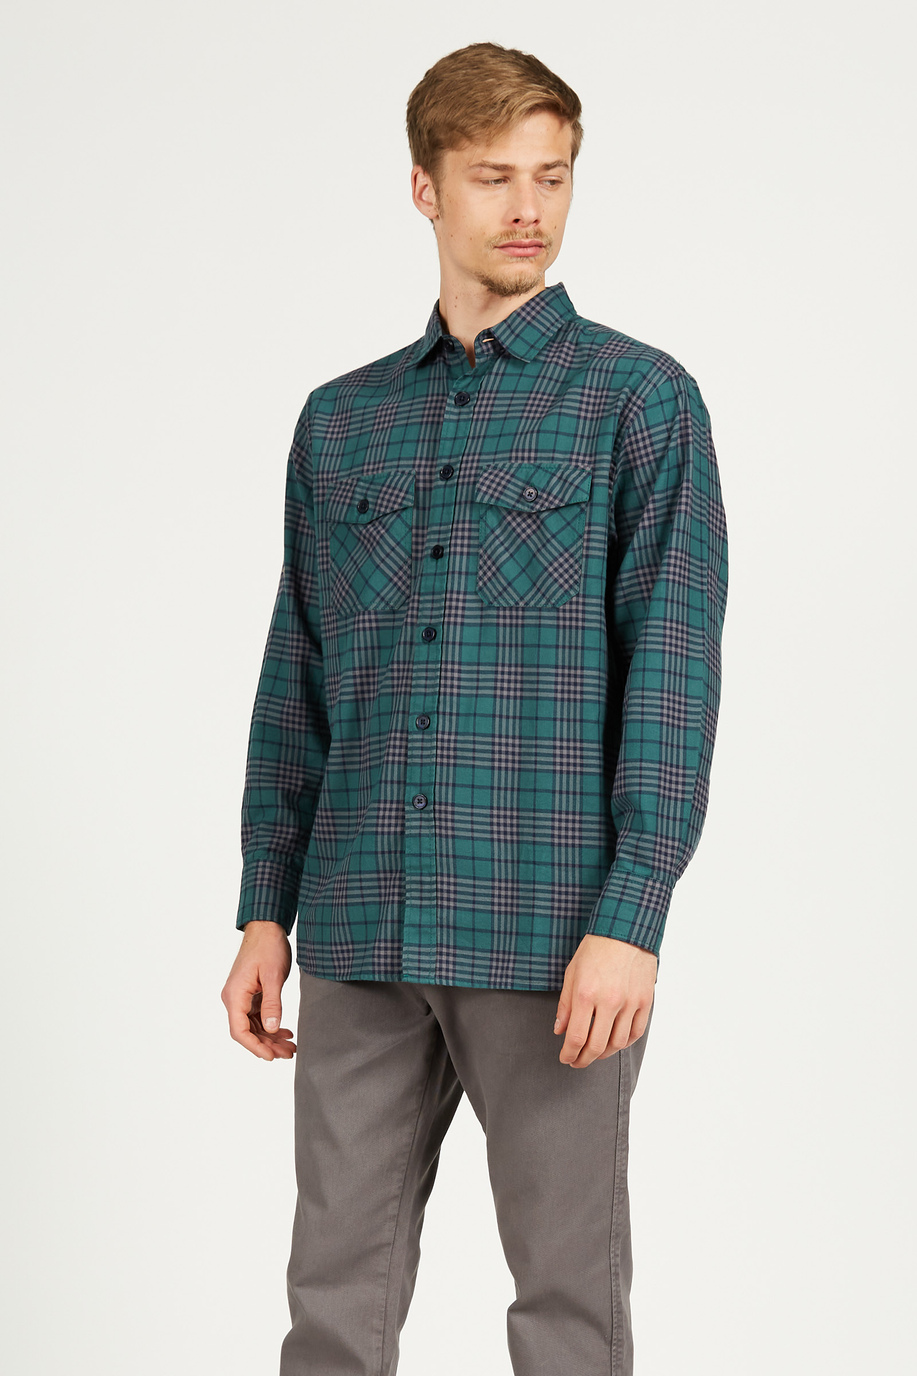 Men's shirt in cotton with long sleeves, oversized fit - test | La Martina - Official Online Shop